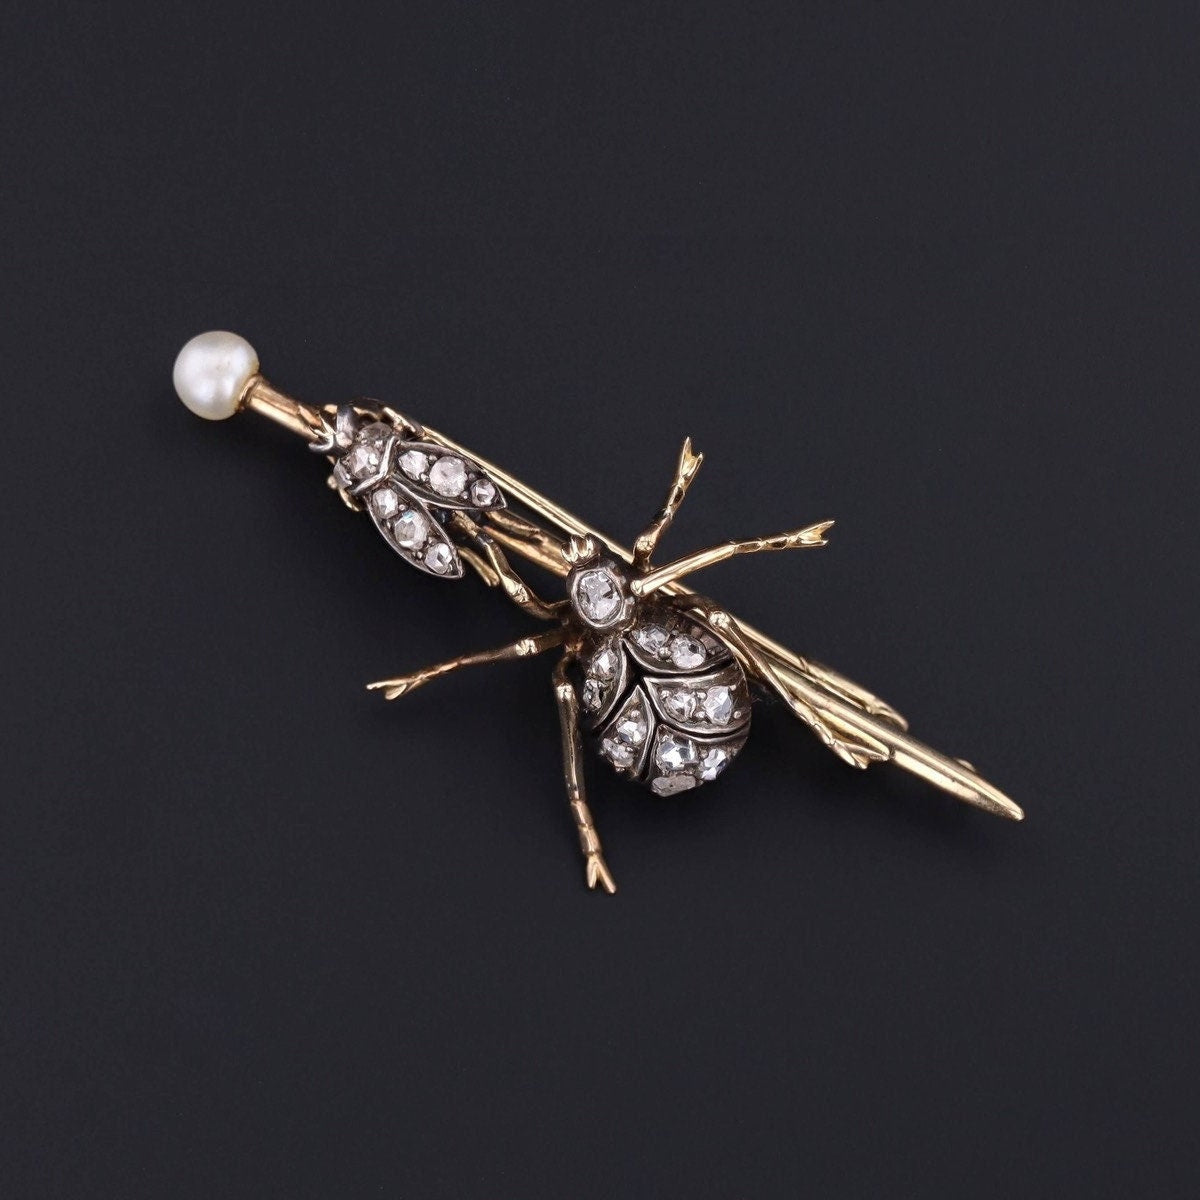 Antique Insect Brooch | 14k Gold, Silver, Diamond & Pearl Pin 